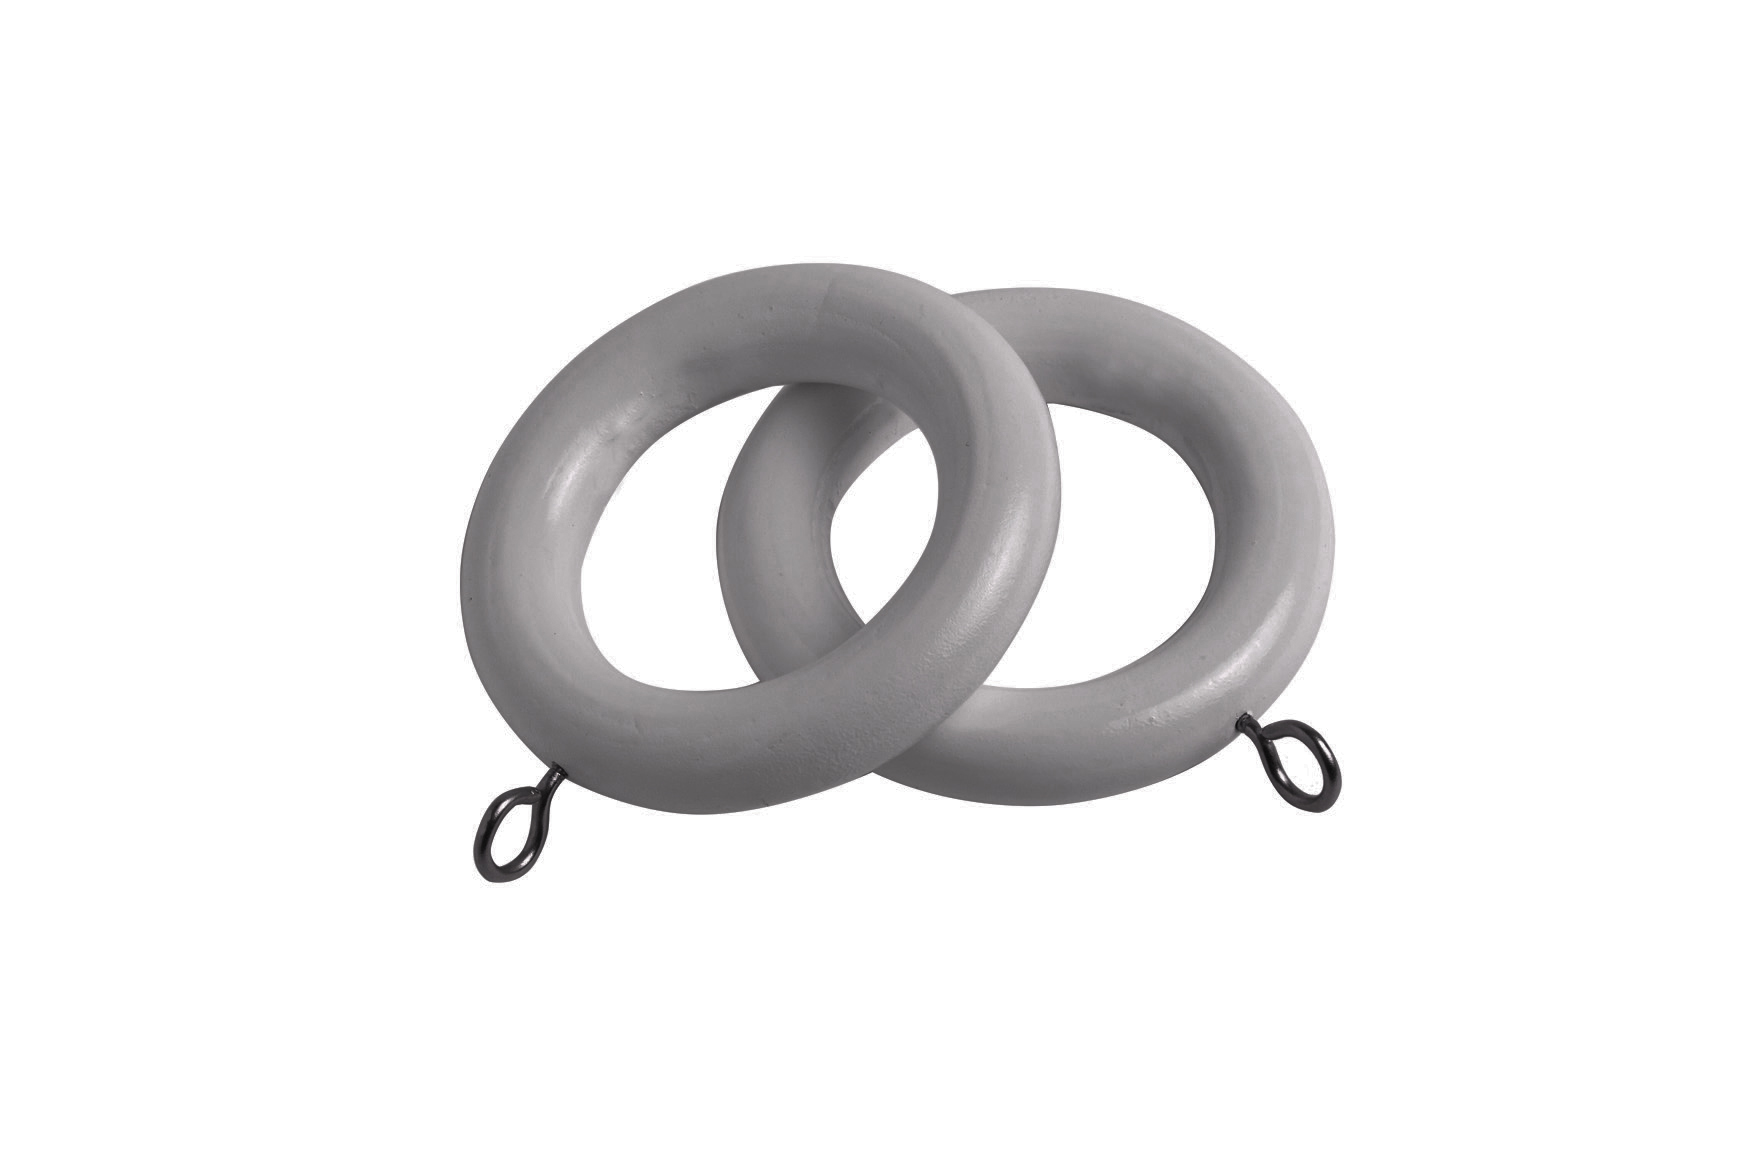 County 28mm Wooden Curtain Rings Light Grey - 4 Pack